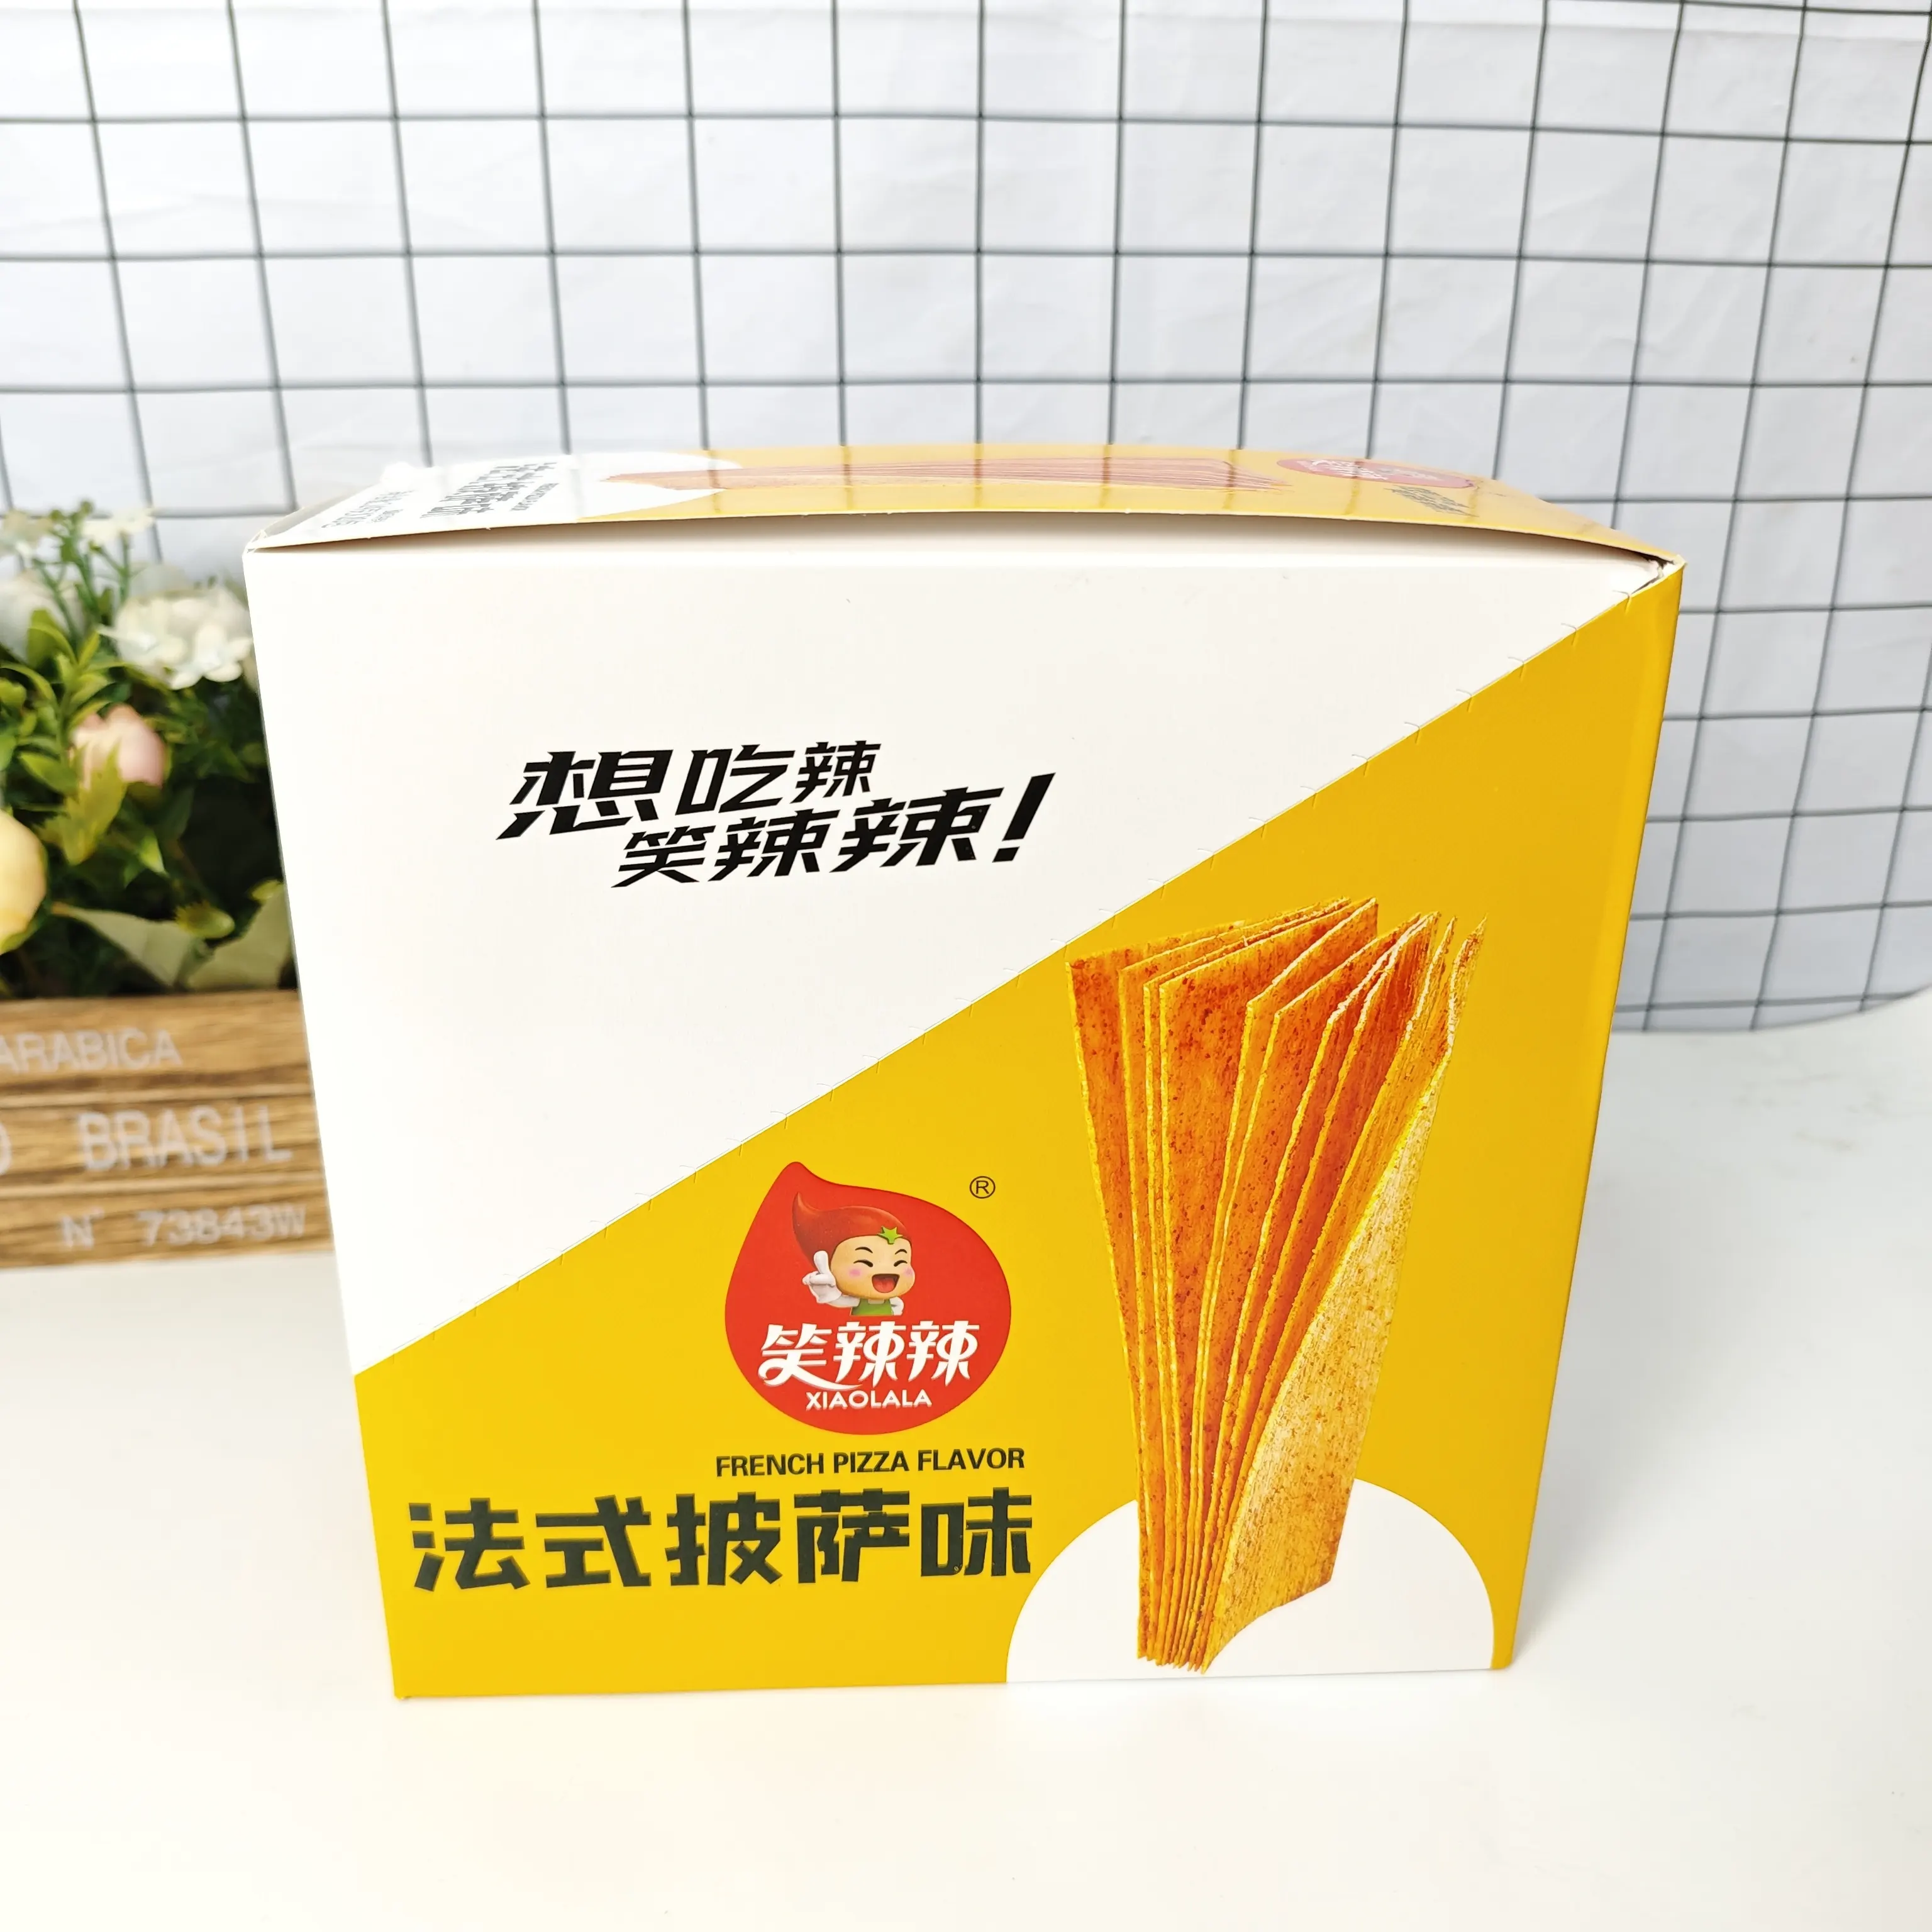 Hot sale Xiaolala New crispy french pizza flavor cereal Asian snacks Chinese spicy strips food